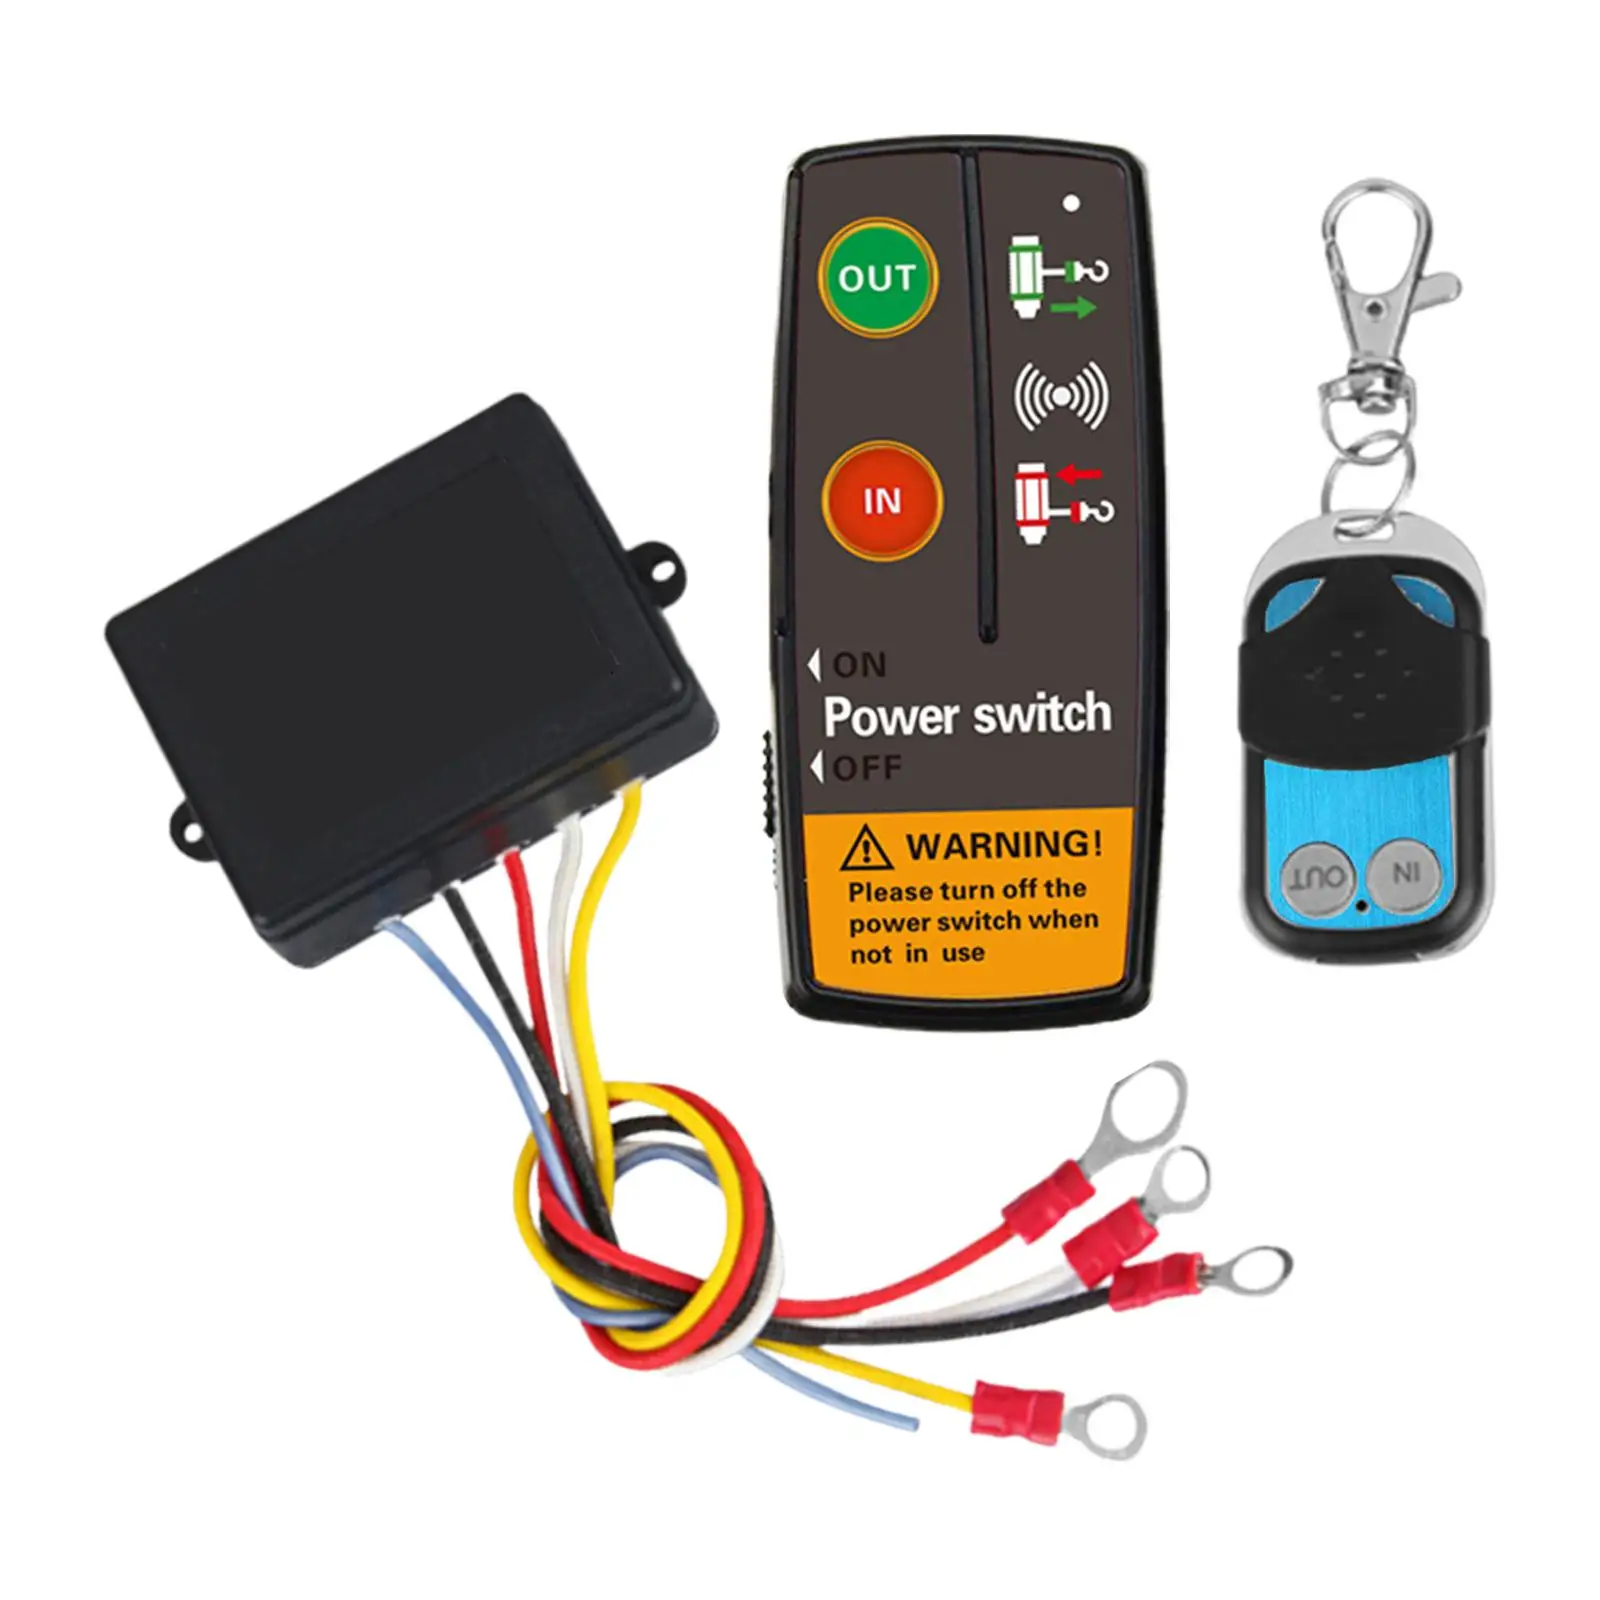 Wireless Winch Remote Control Kit Durable Heavy Duty Automatic Winch Control with Indicator Light Spare Parts for Car Truck